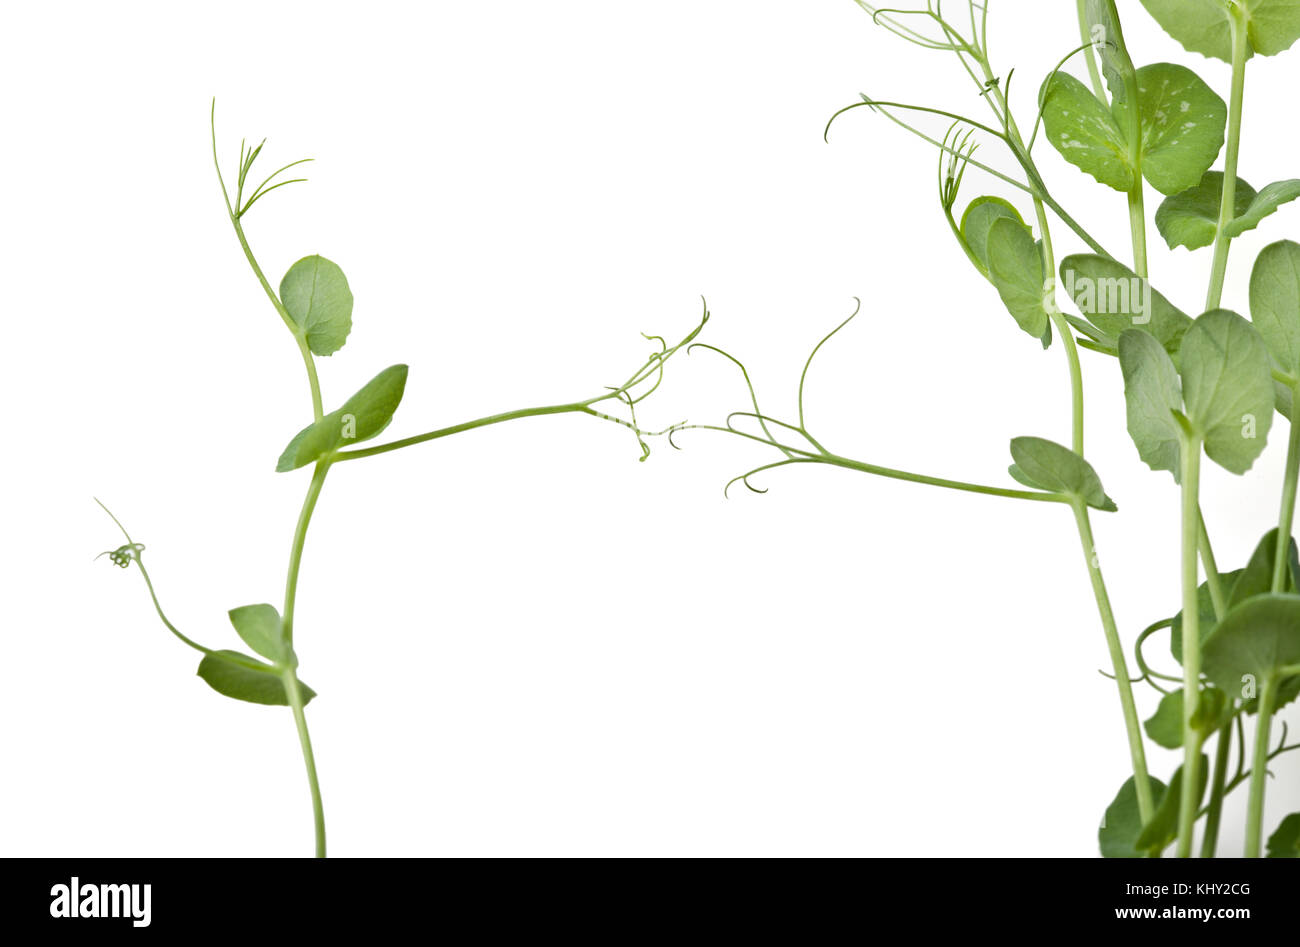 Pea shoots growing, isolated on white background Stock Photo